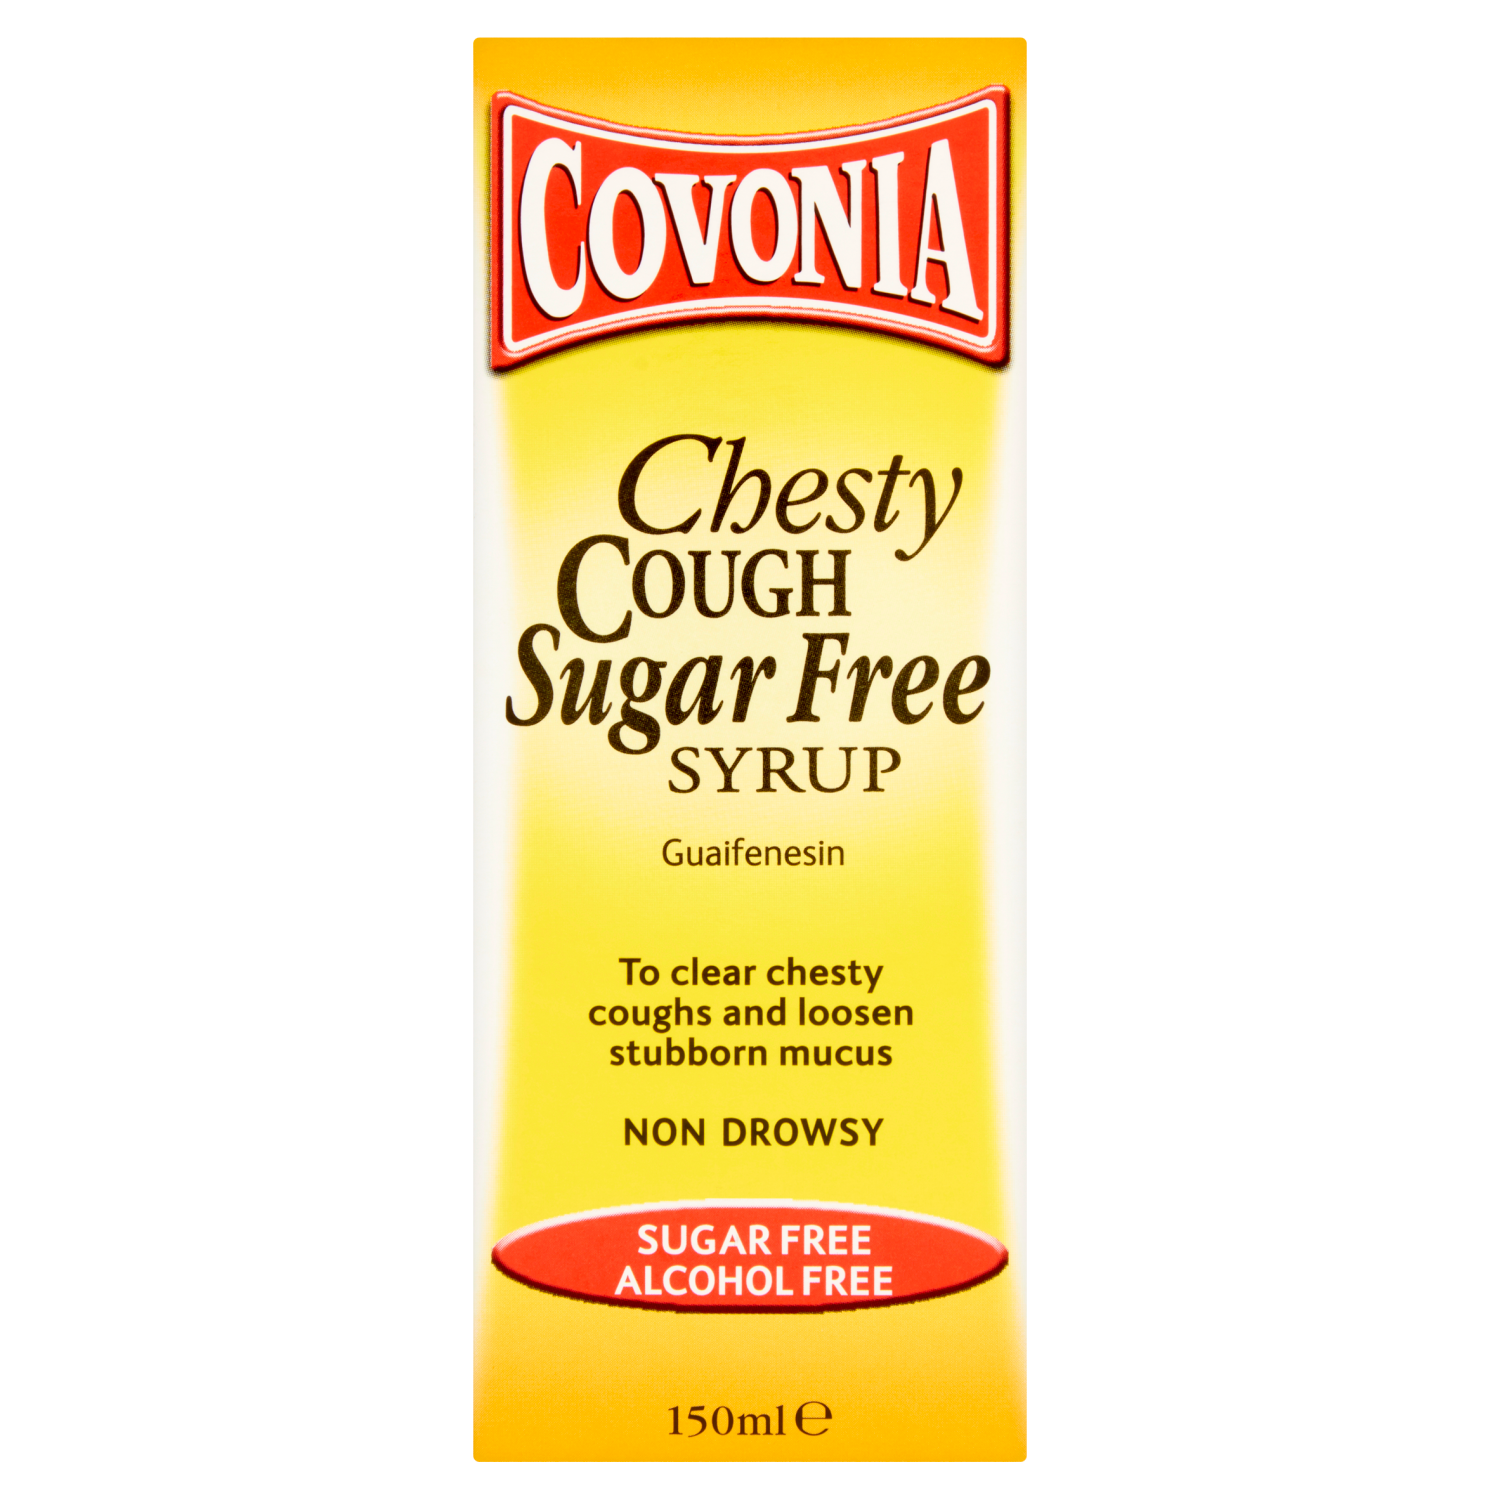 Covonia Chesty Cough Sugar Free Syrup 150ml